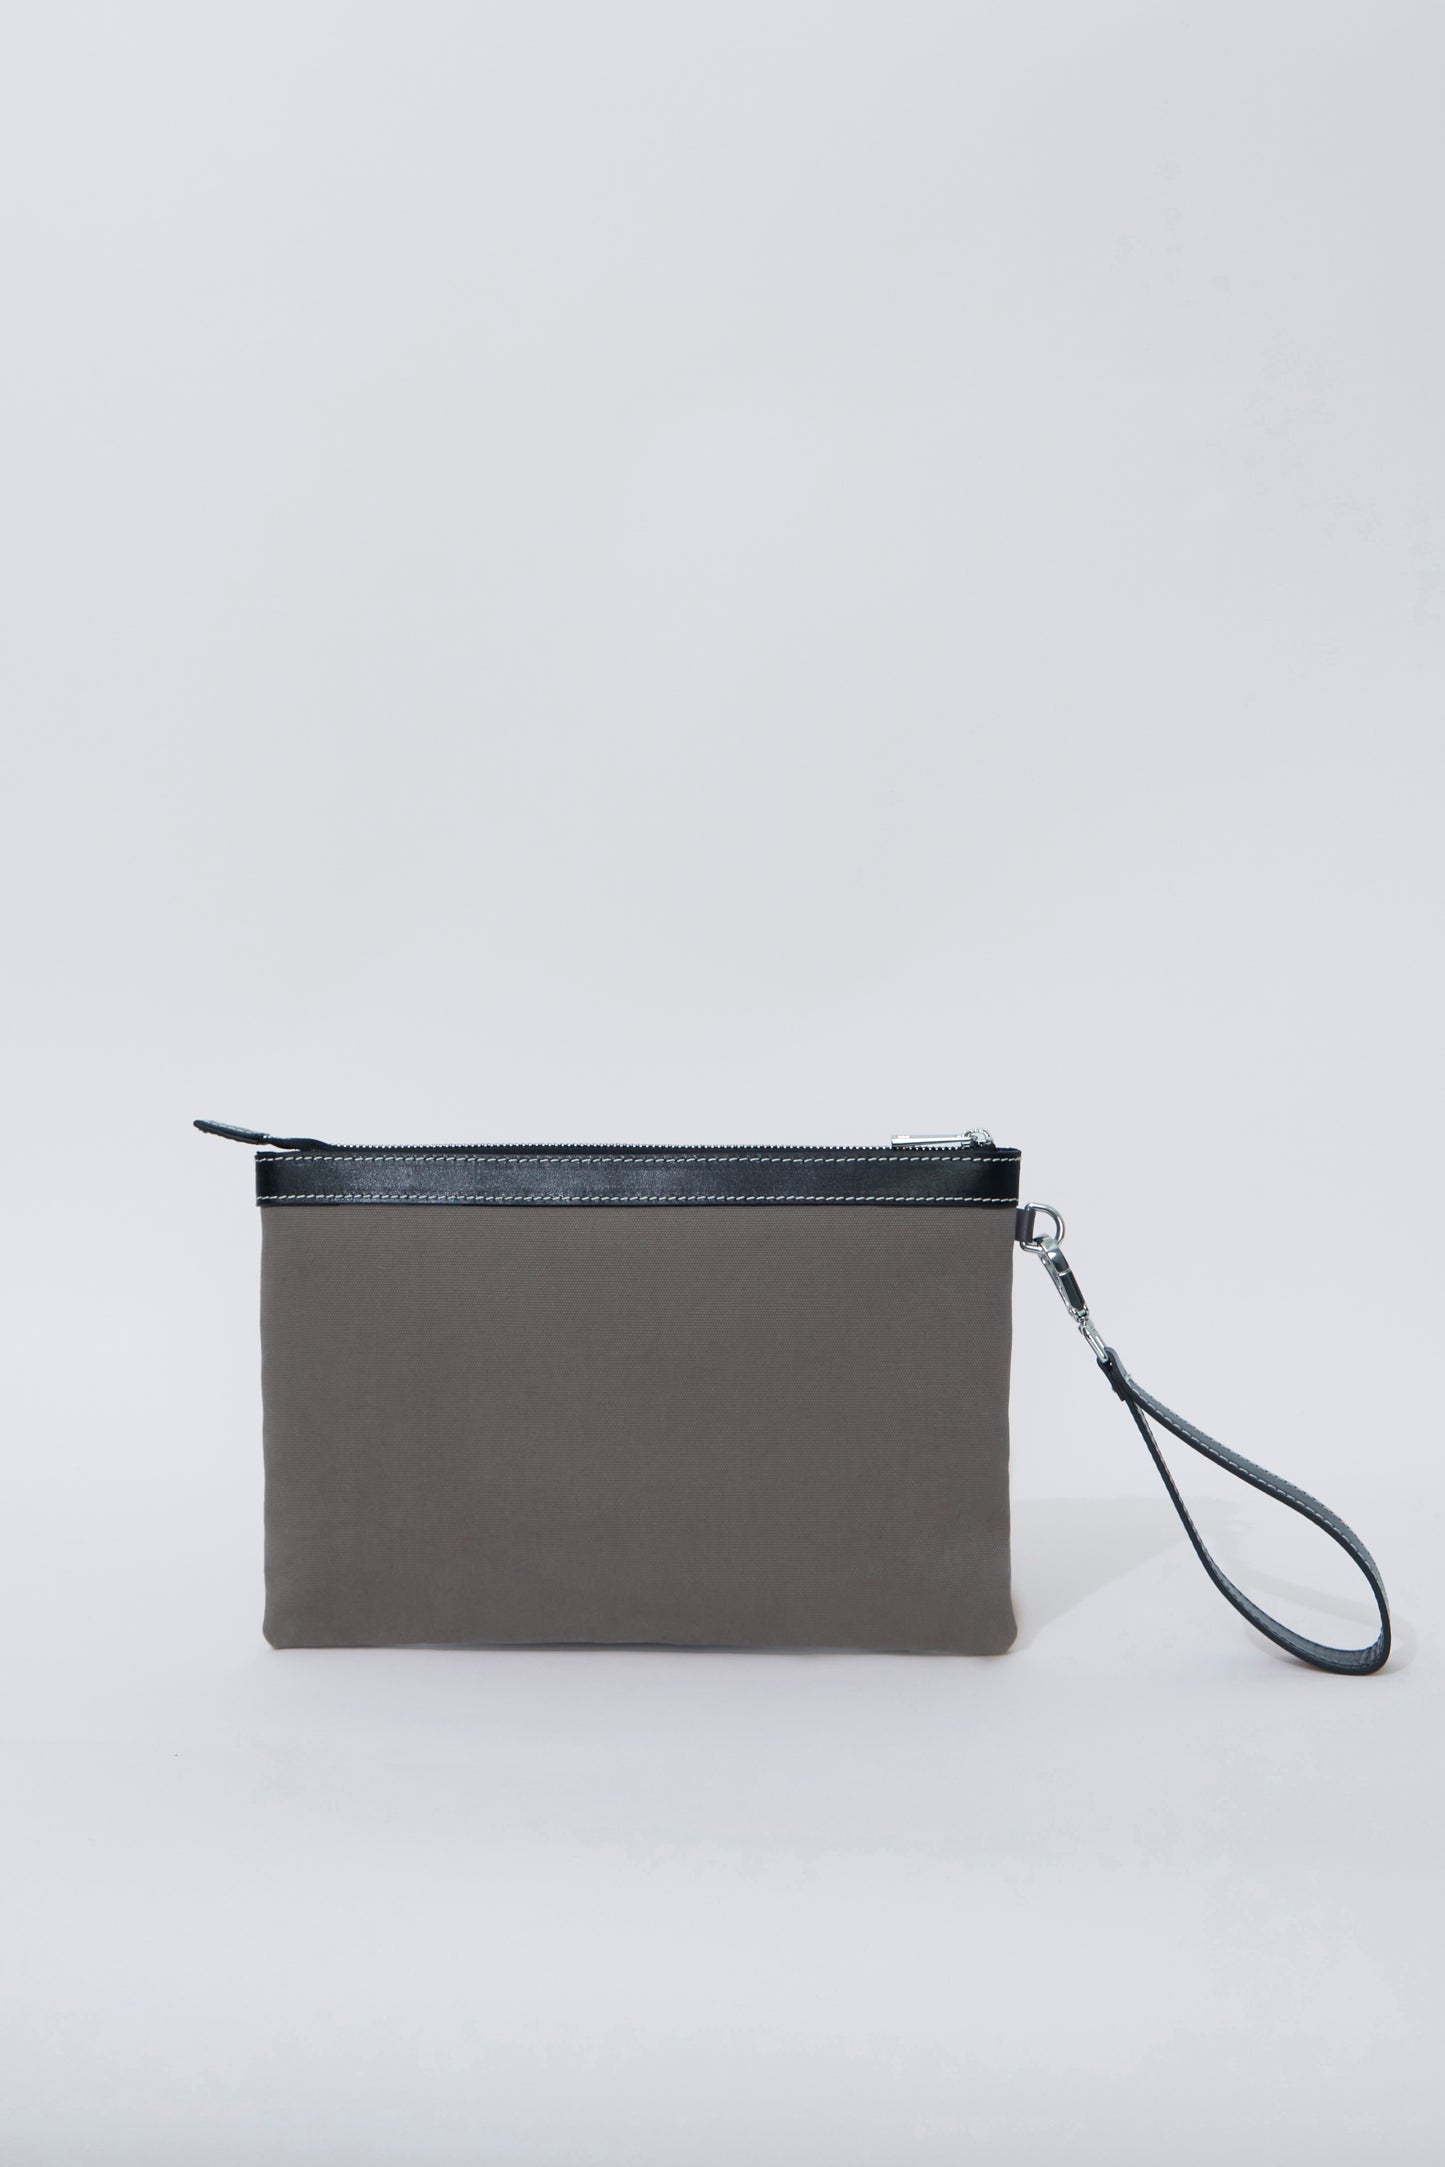 STITCHED CLUTCH BAG IN MINK AND BLACK